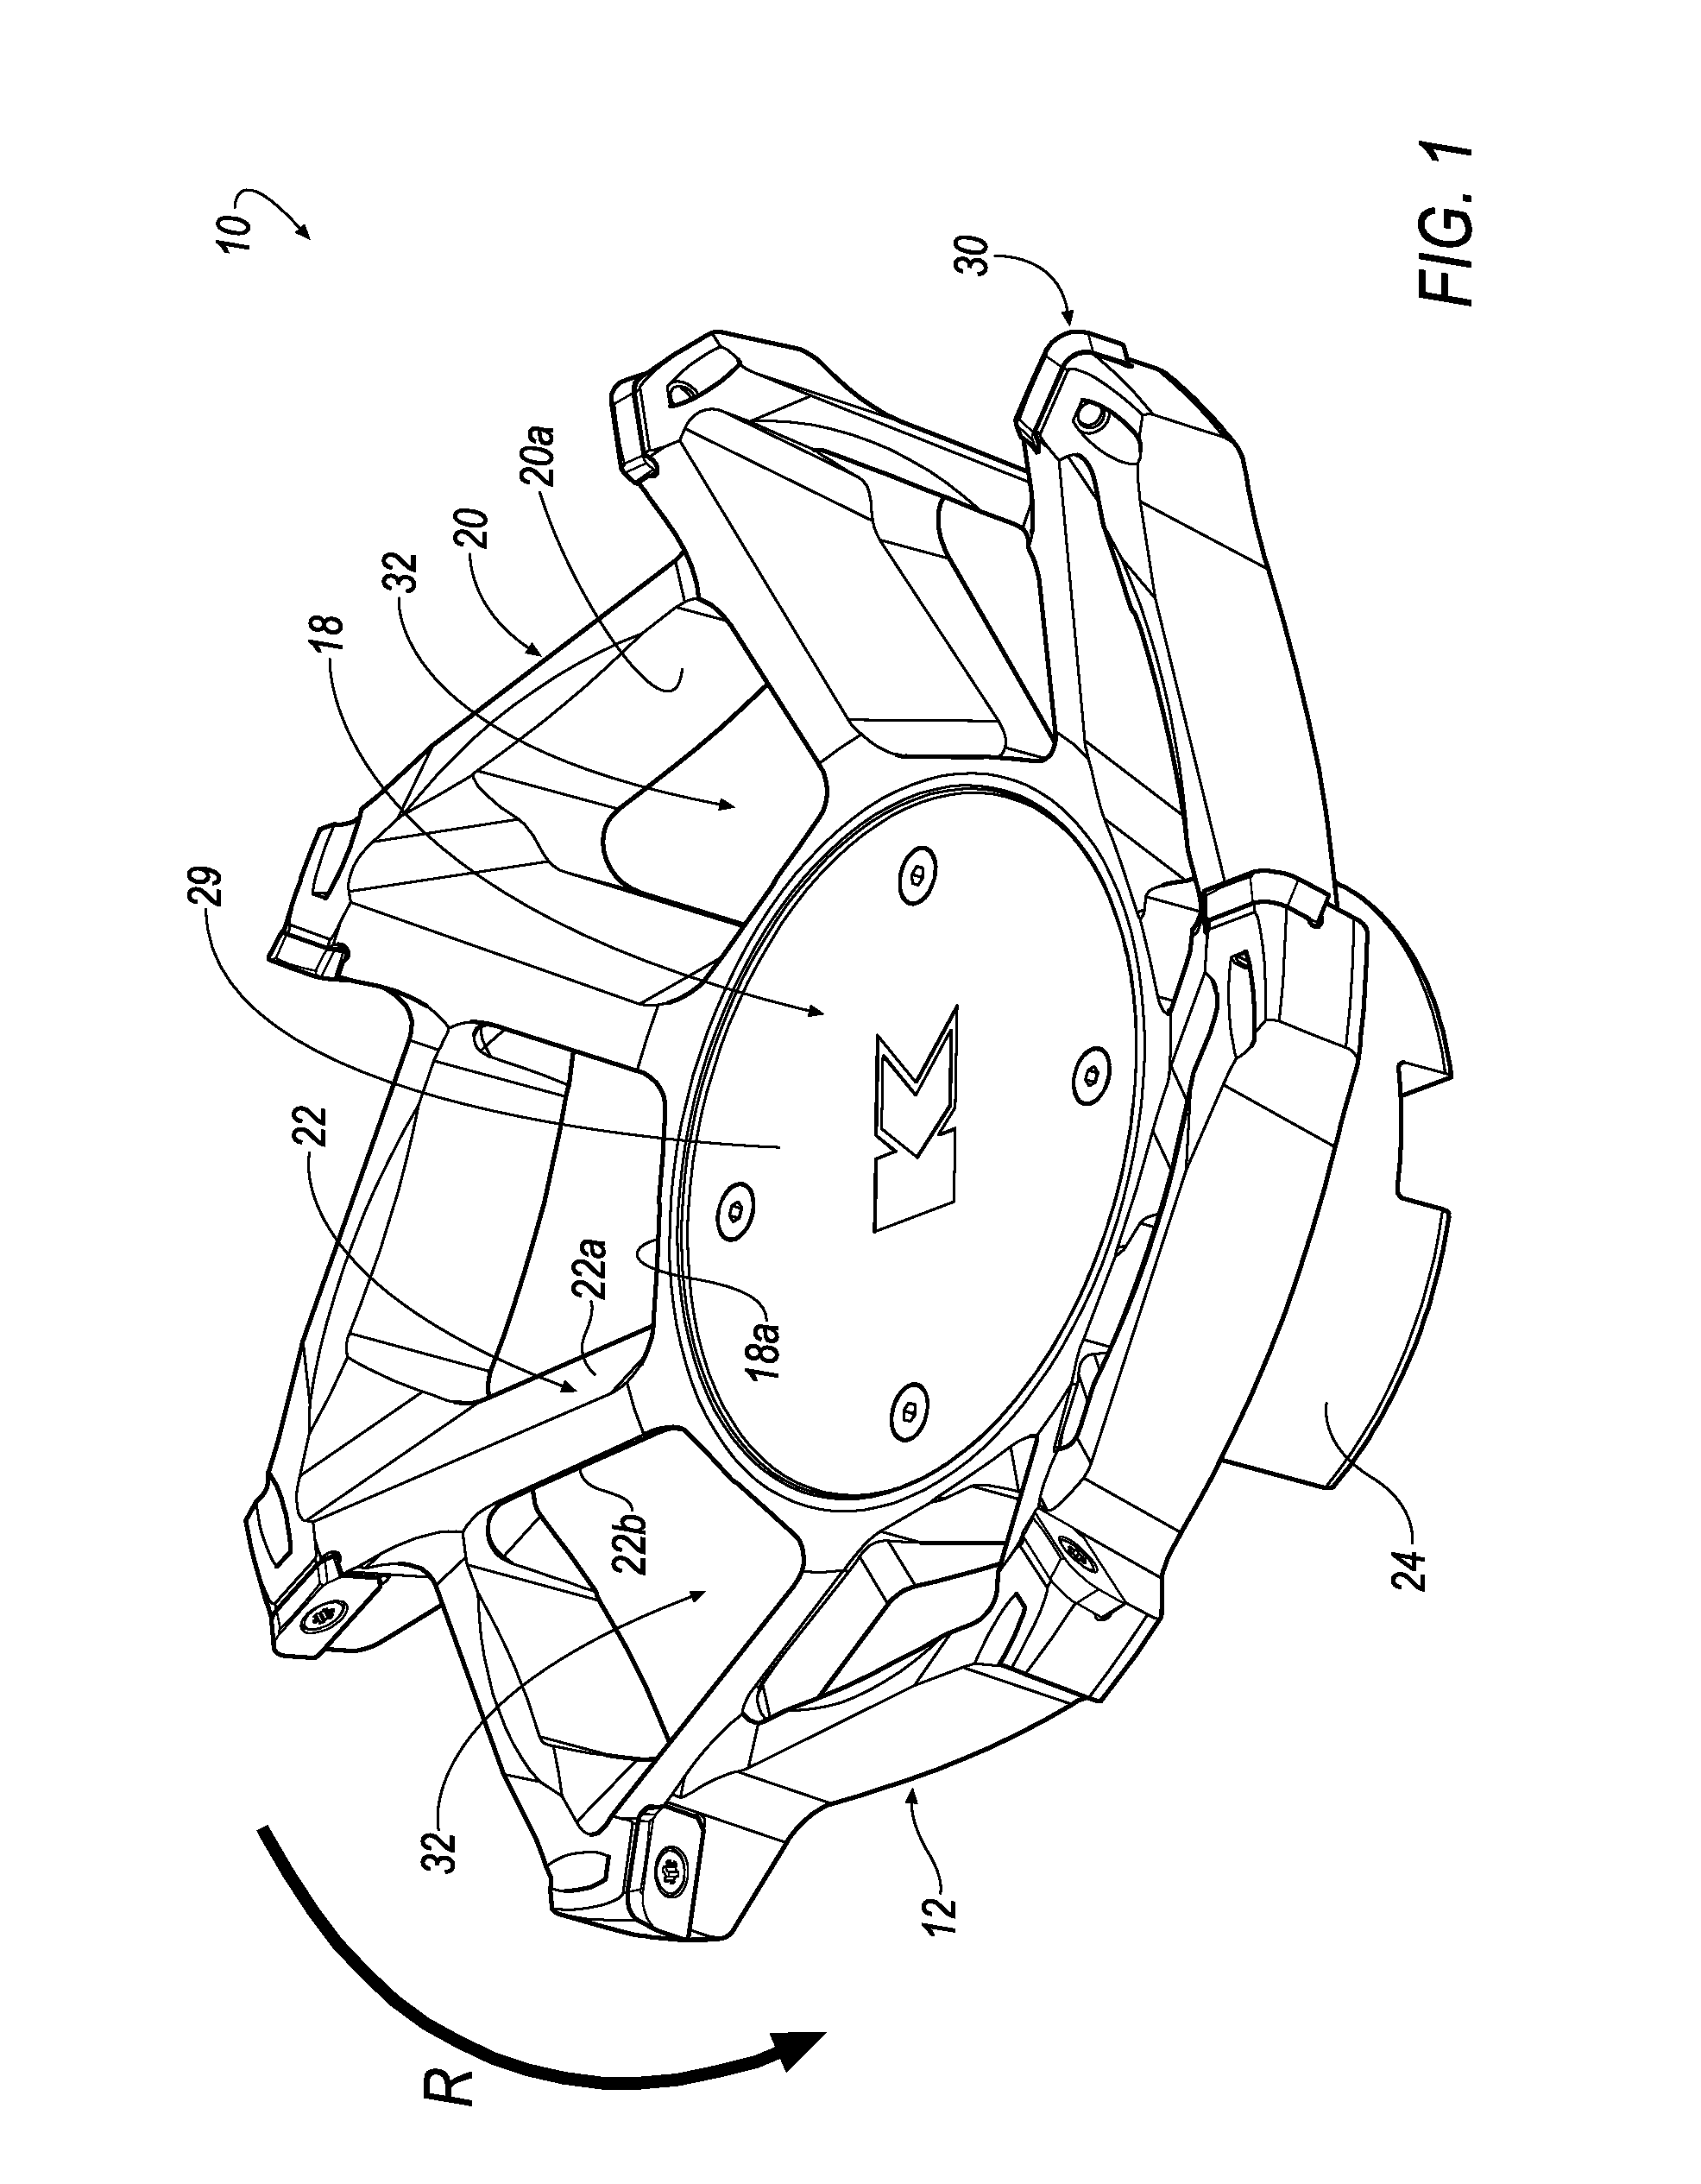 Rotary cutting tool with effective chip evacuation